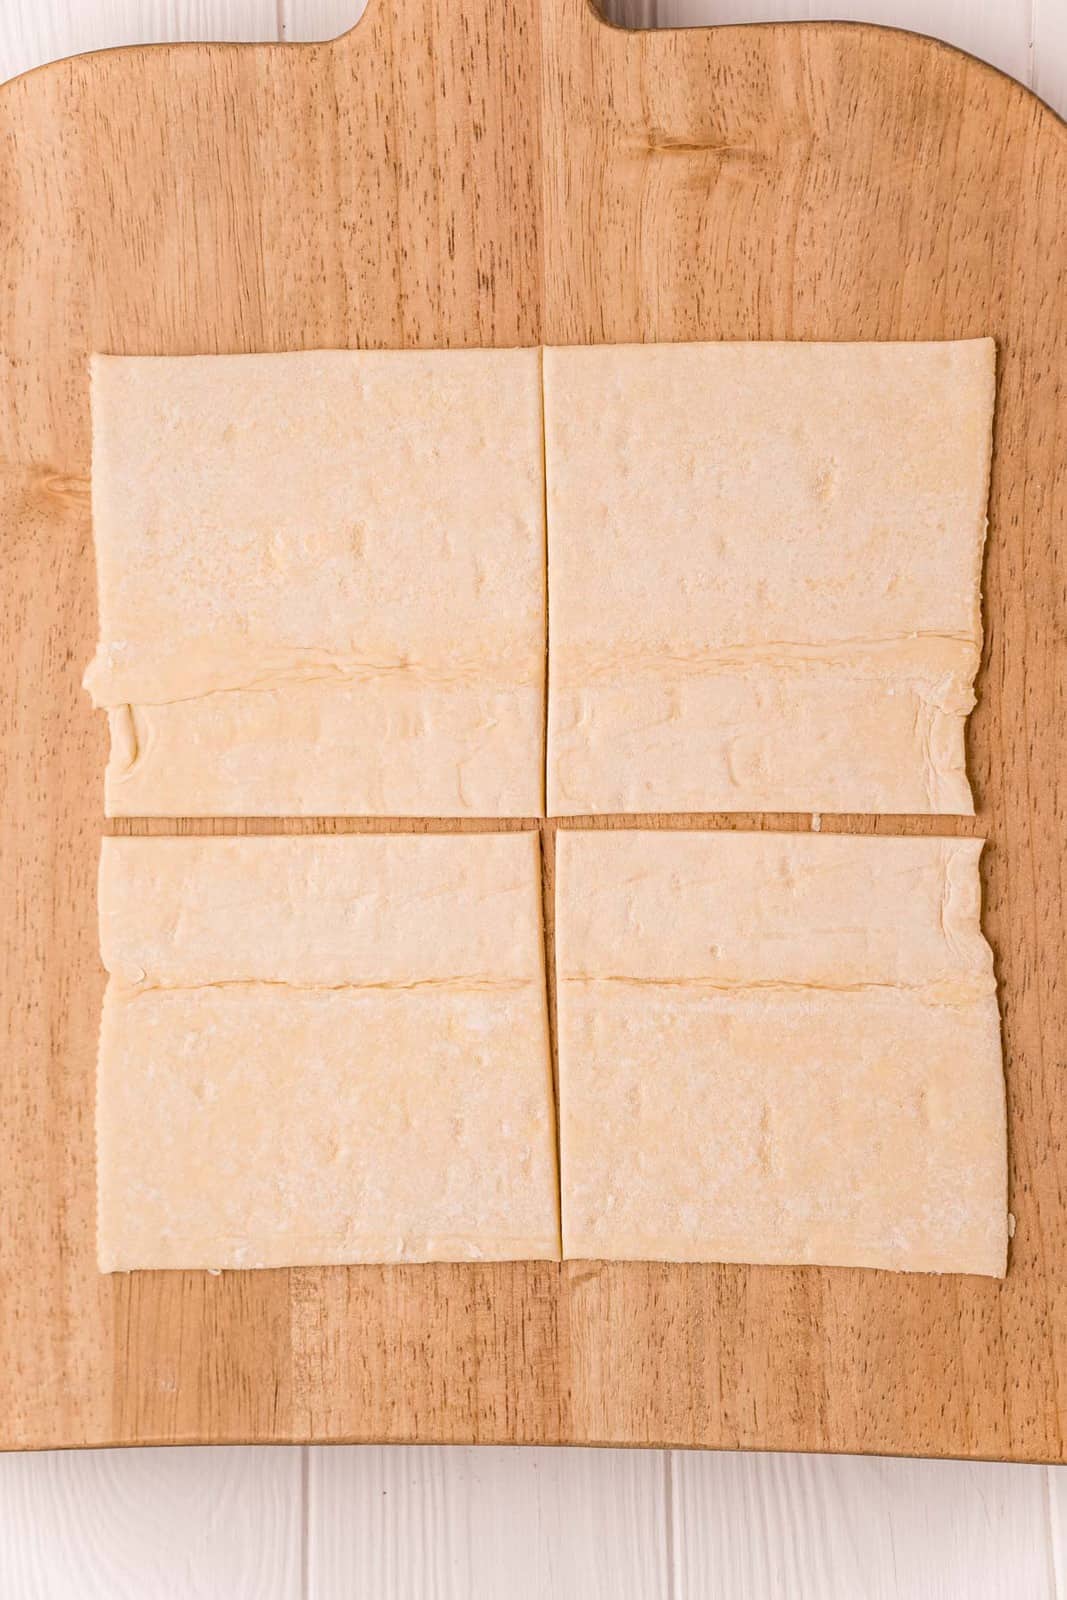 One sheet of puff pastry cut into 4 squares on wooden cutting board